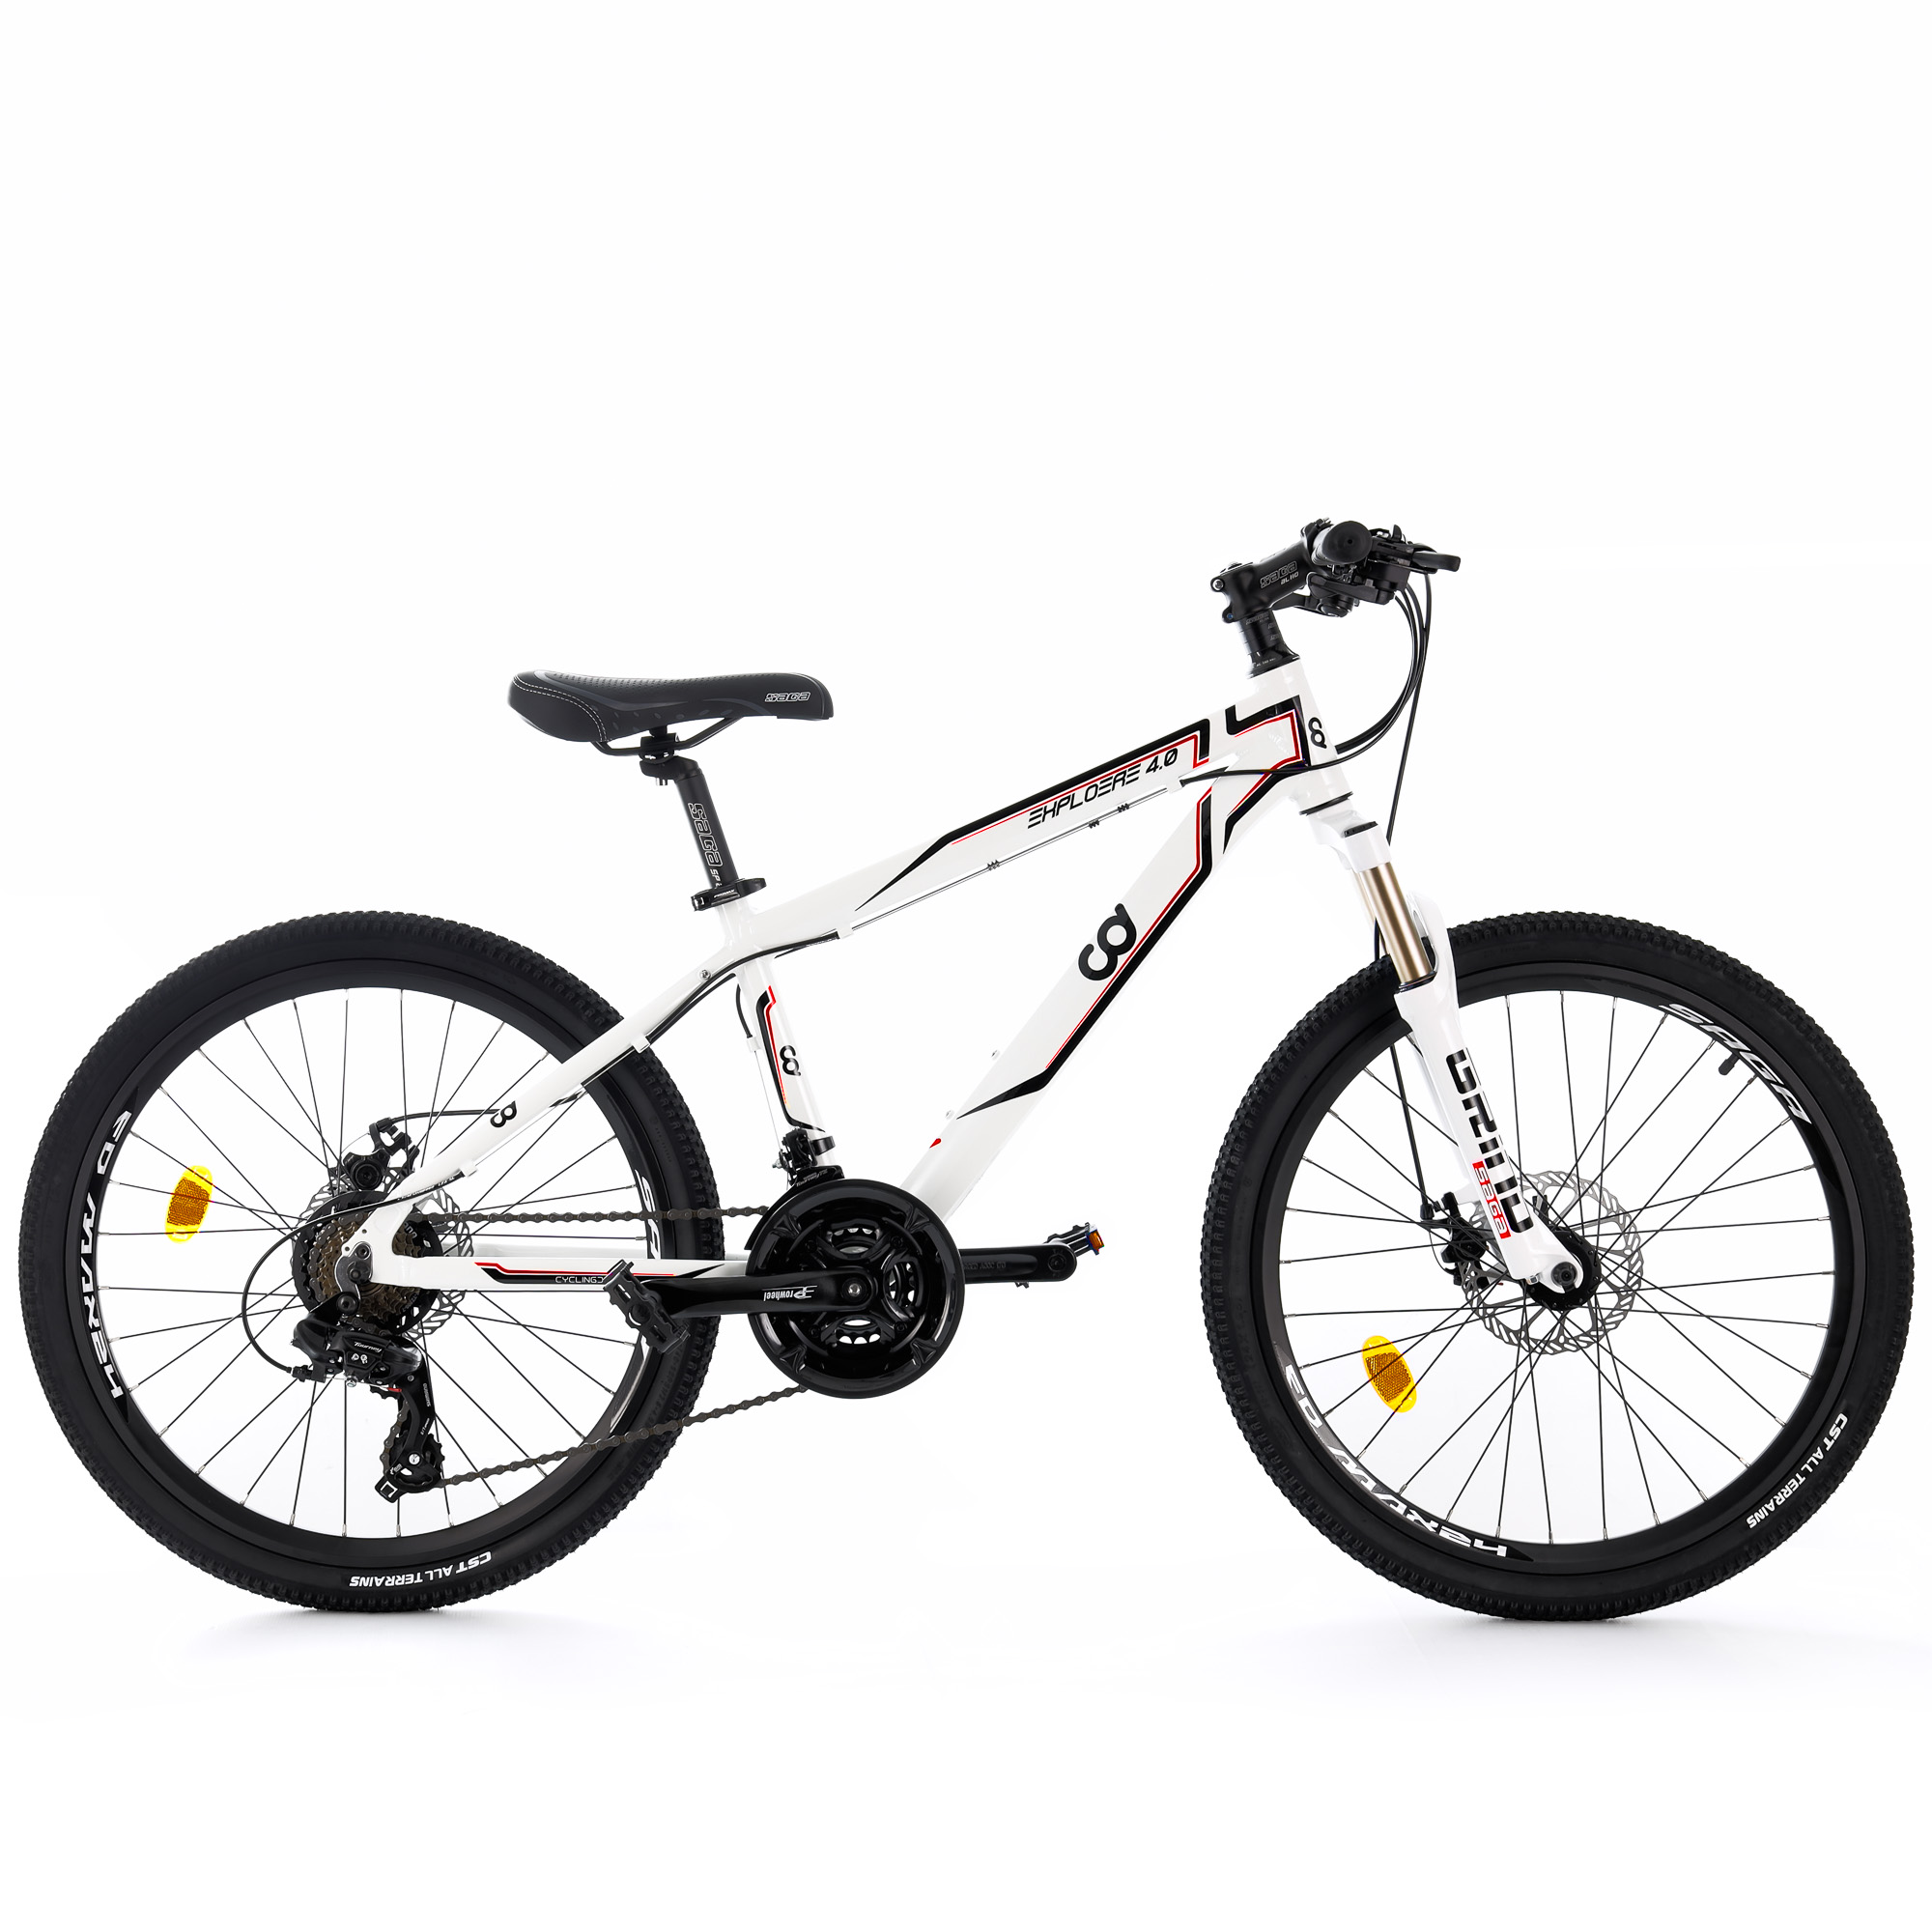 CyclingDeal EXPLORER Kids Children Mountain Bike Bicycle MTB WHITE - 21 Speed 24" Wheels 14" Frame for 8-12 Years Old